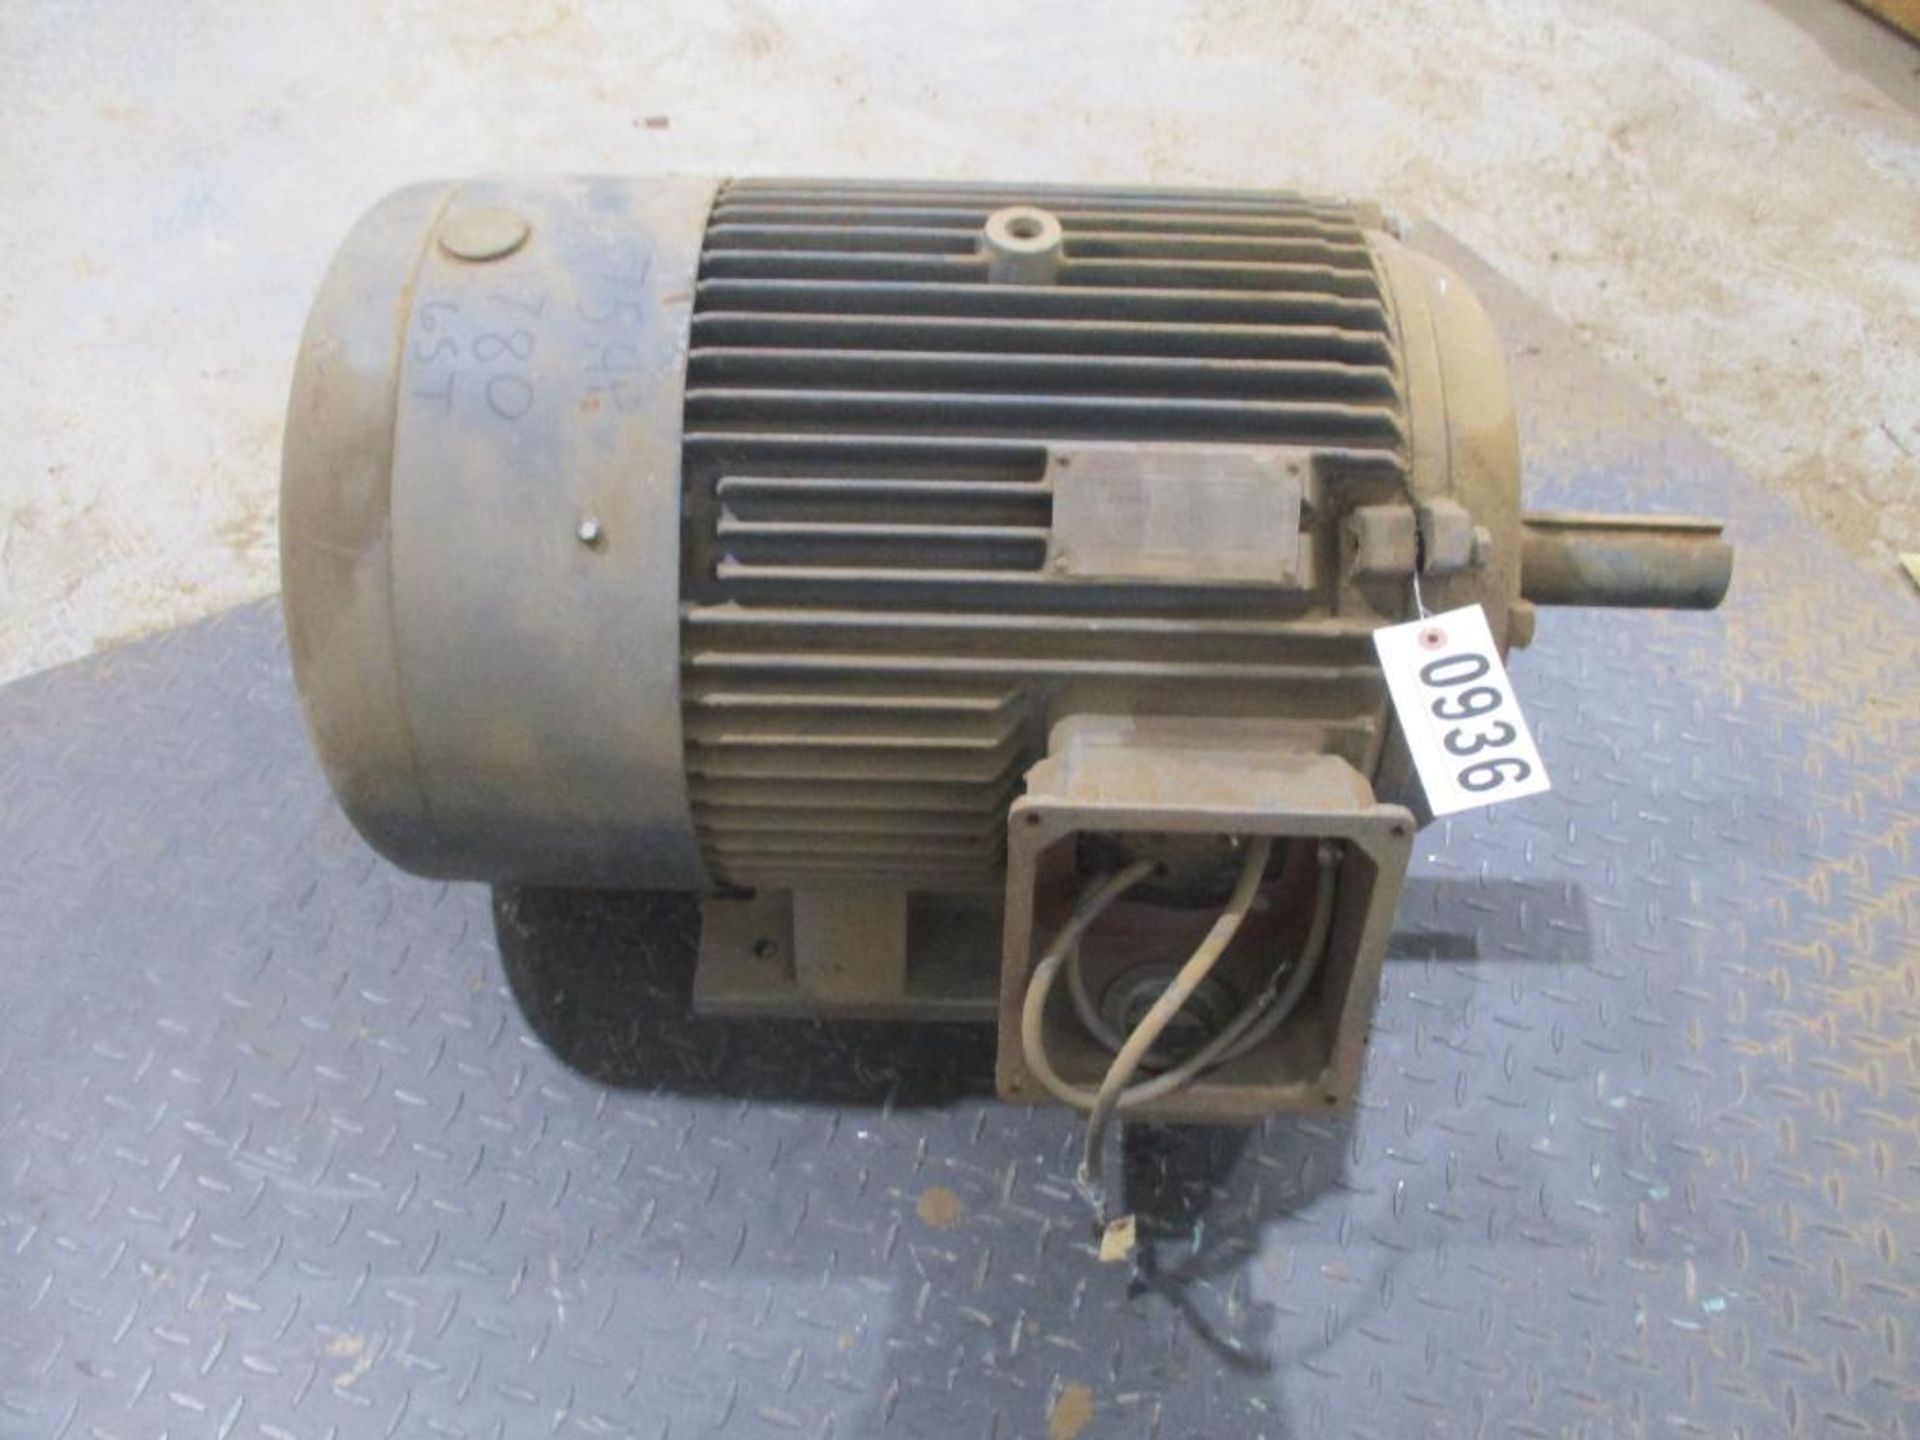 TECO AMERICA 3 PHASE 75HP 1780RPM 325T FRAME A/C MOTOR P/N 520005S, 773# lbs (There will be a $40 Ri